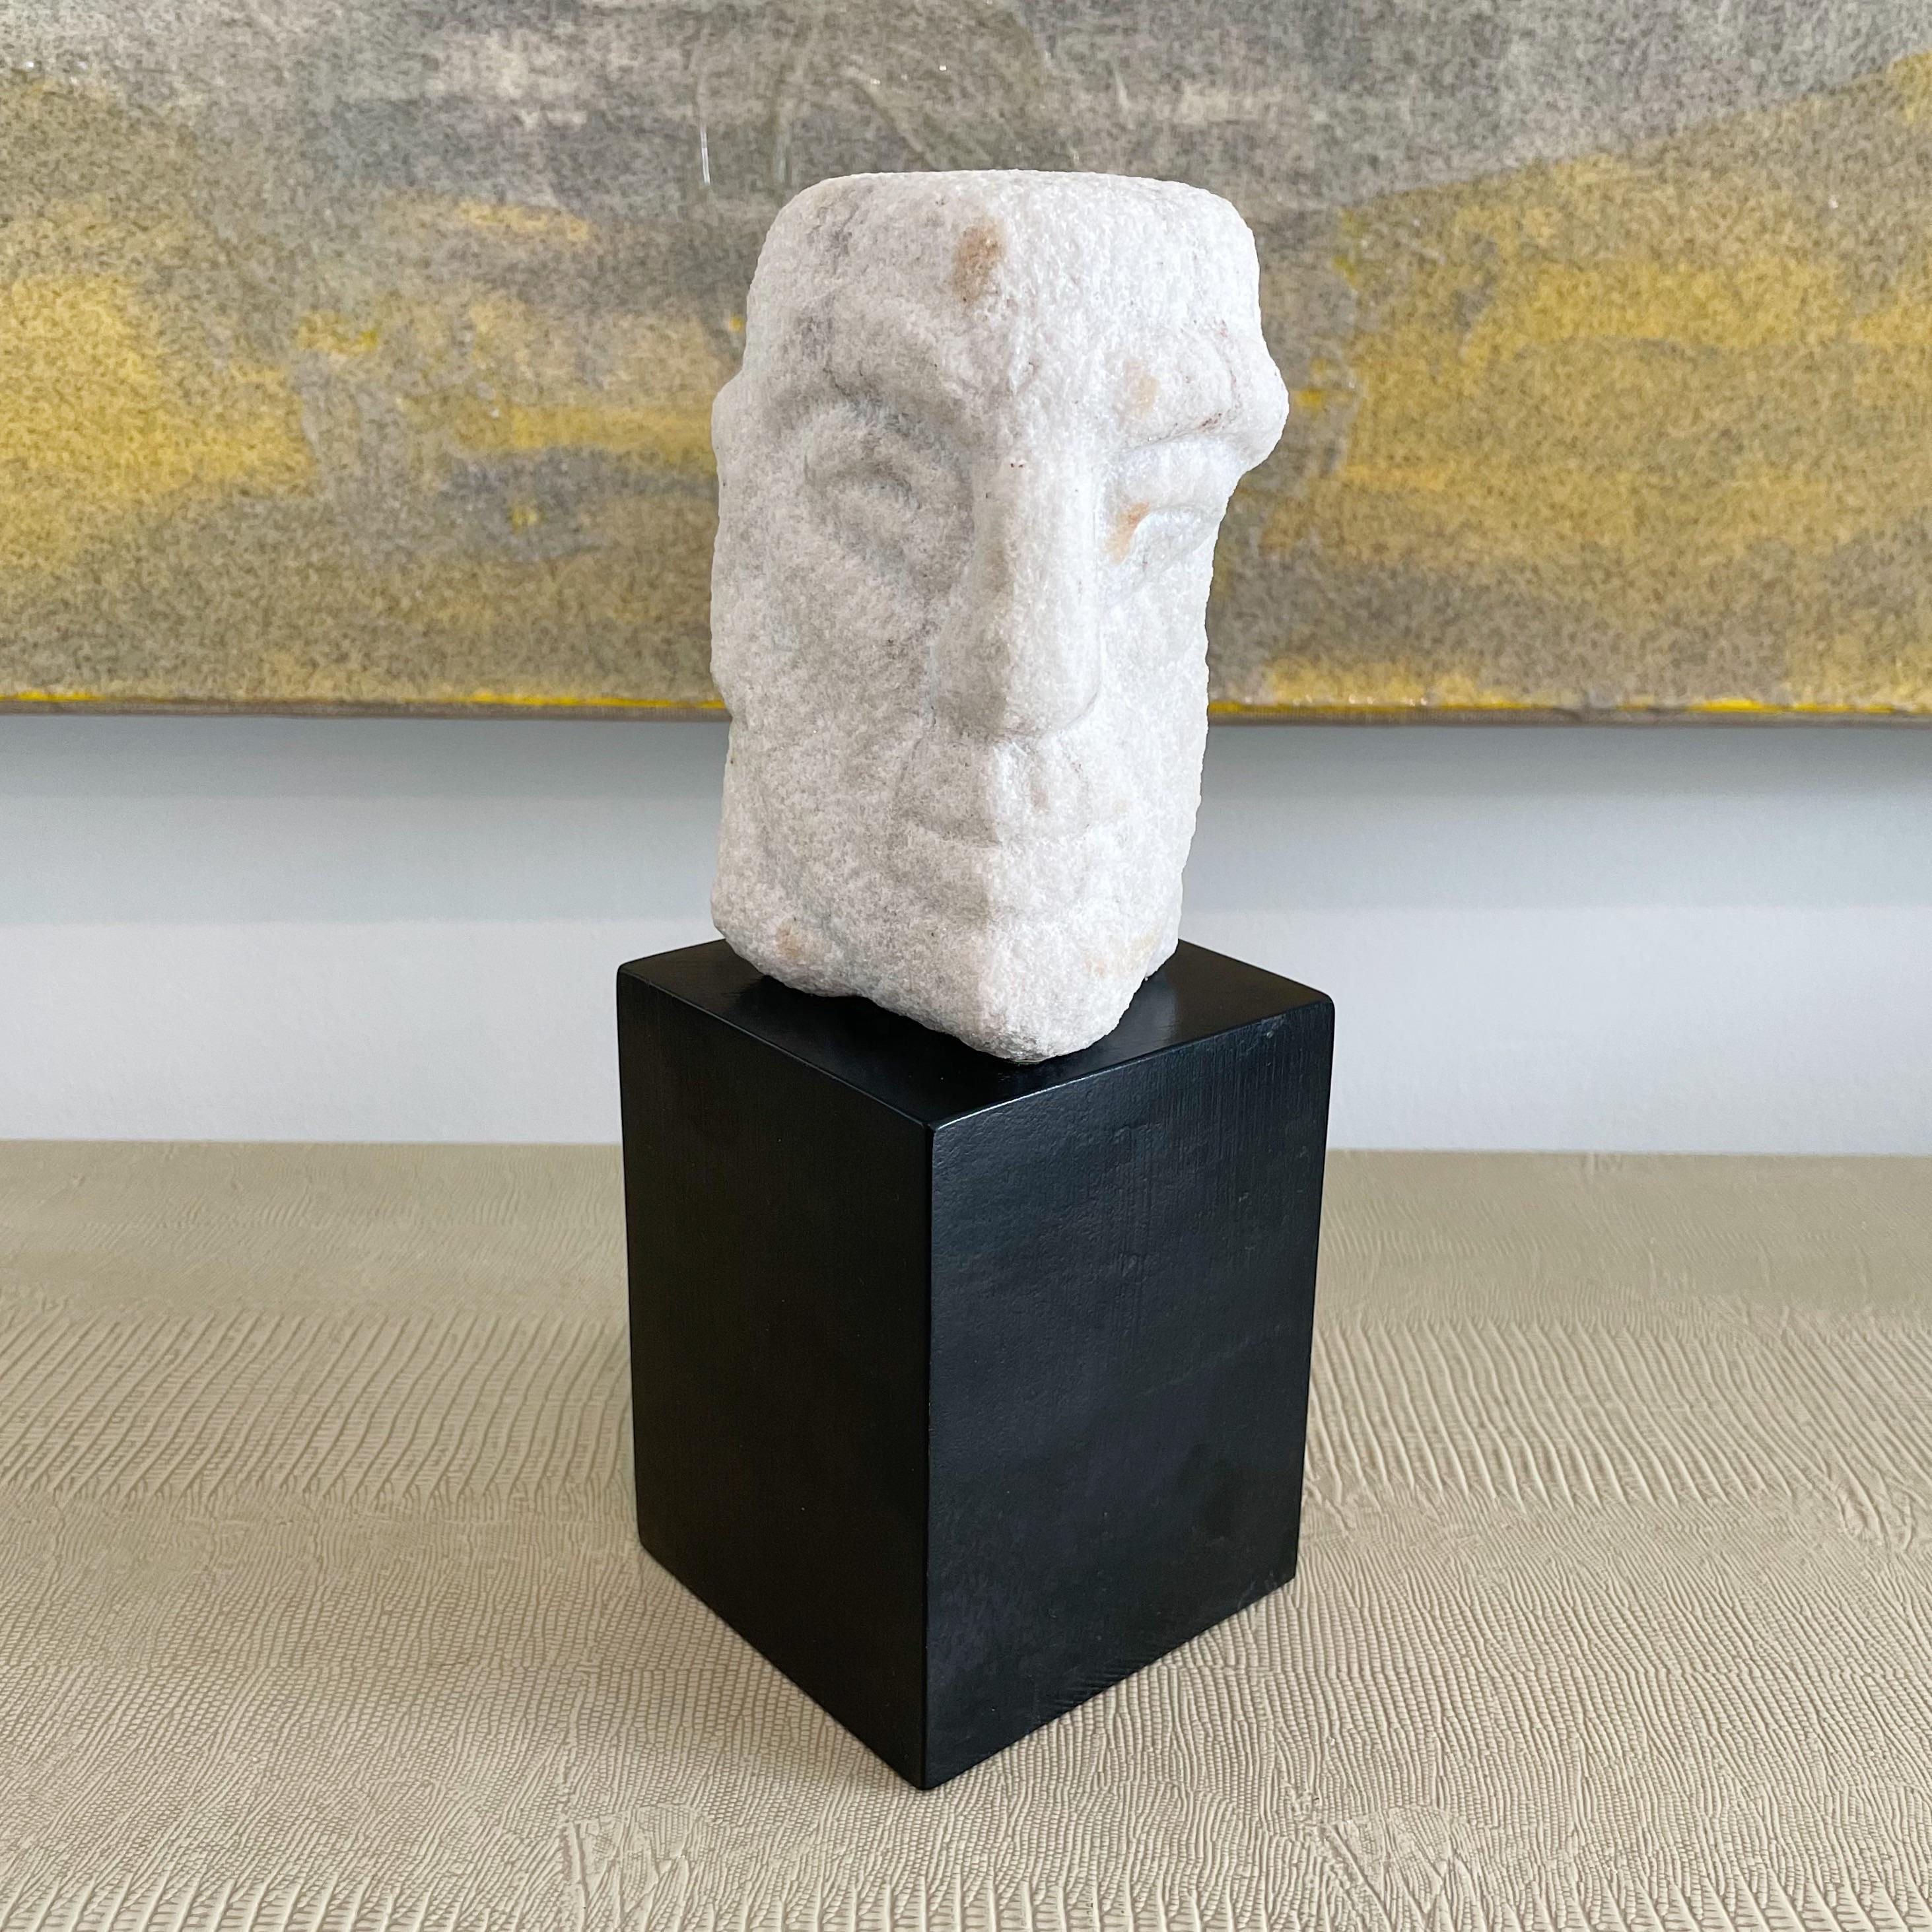 Vintage hand carved solid white marble sculpture of a head on black lacquered plinth wood base. From a Palm Beach Estate. Signed Tarr on reverse.